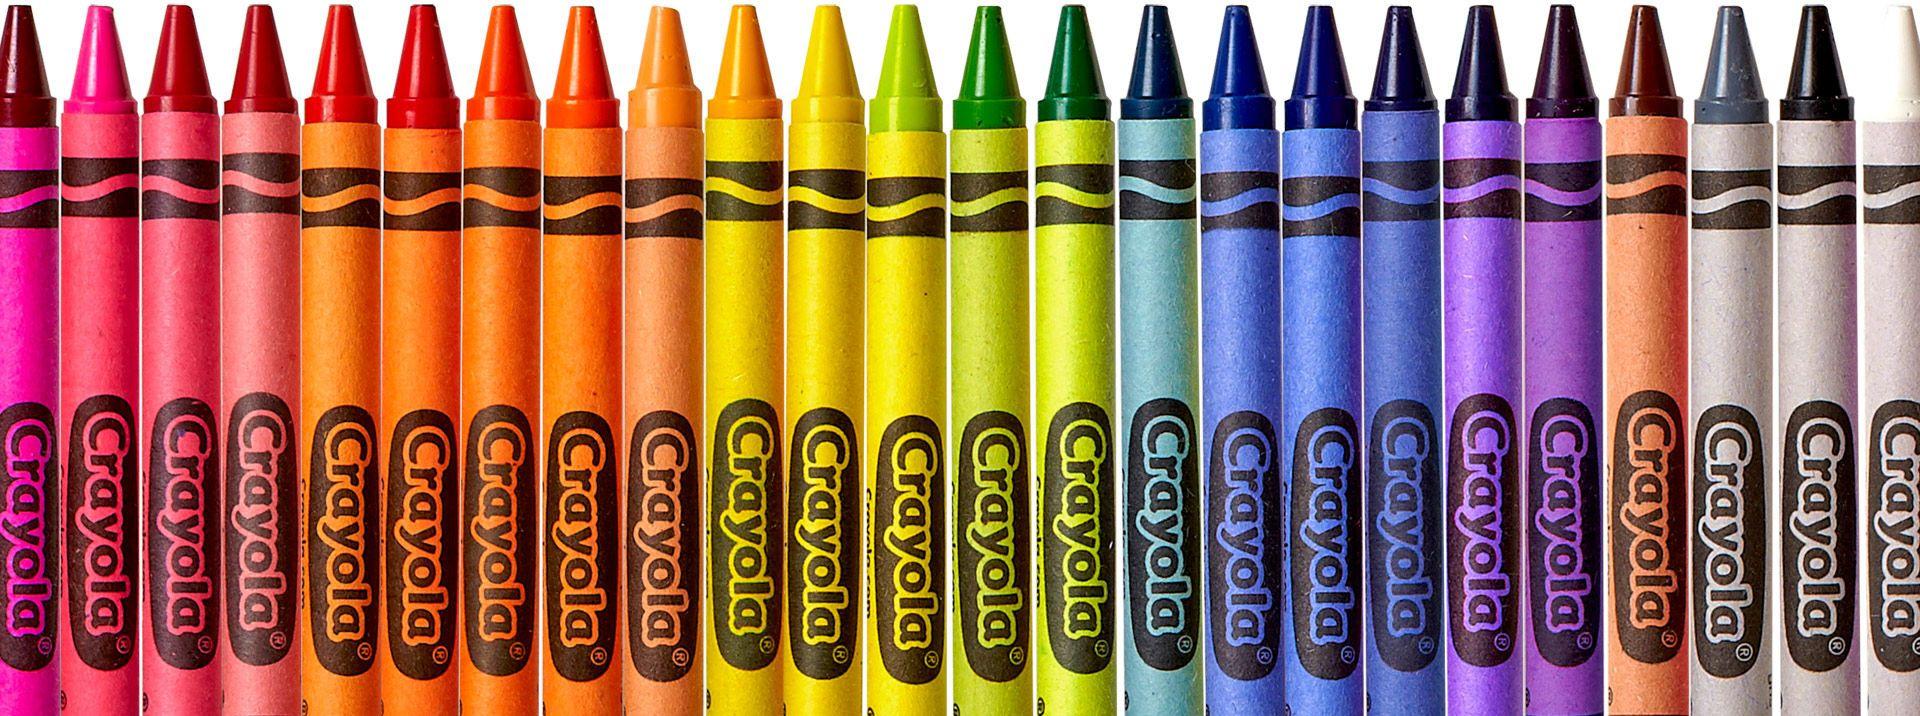 Crayons White Background Image. All White Background